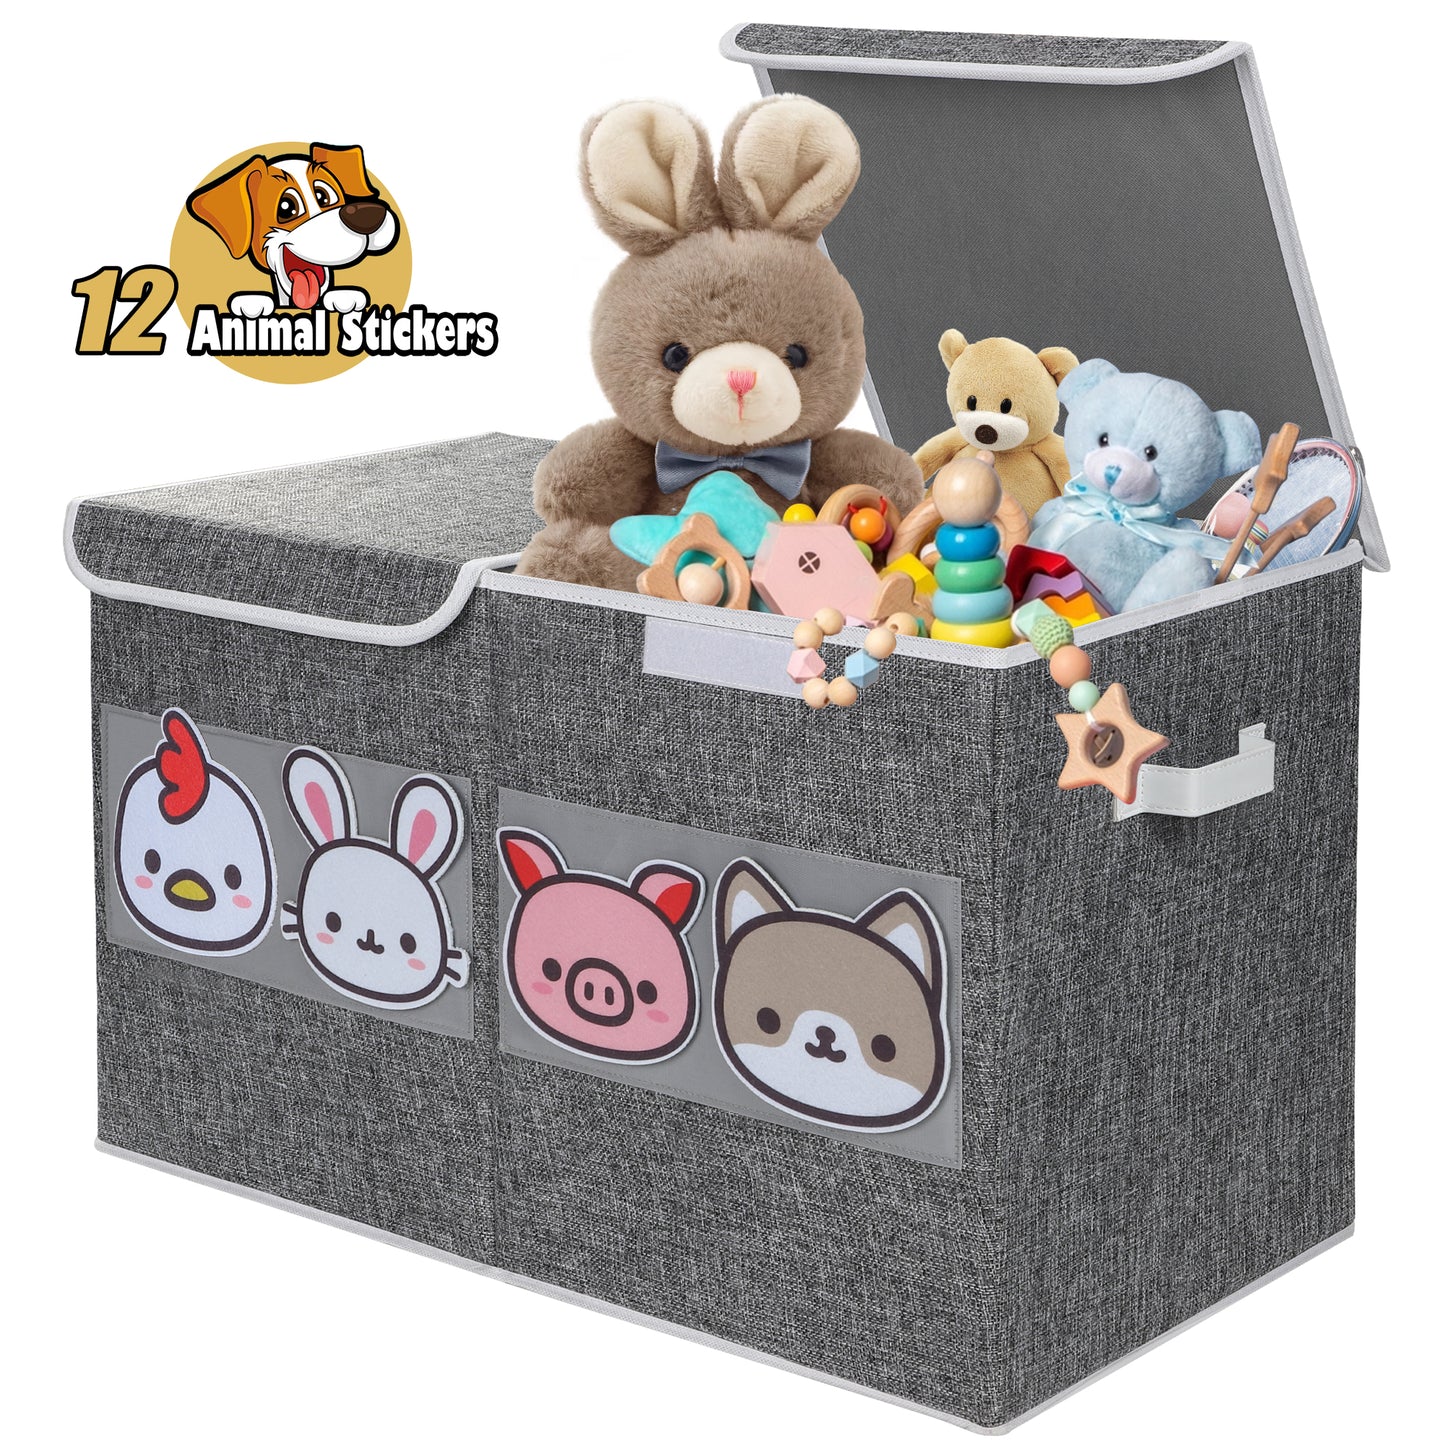 Nefoso Toy Box for Kids, Toy Chests Organizers Storage for Boys and Girls with Flip-Top Lid